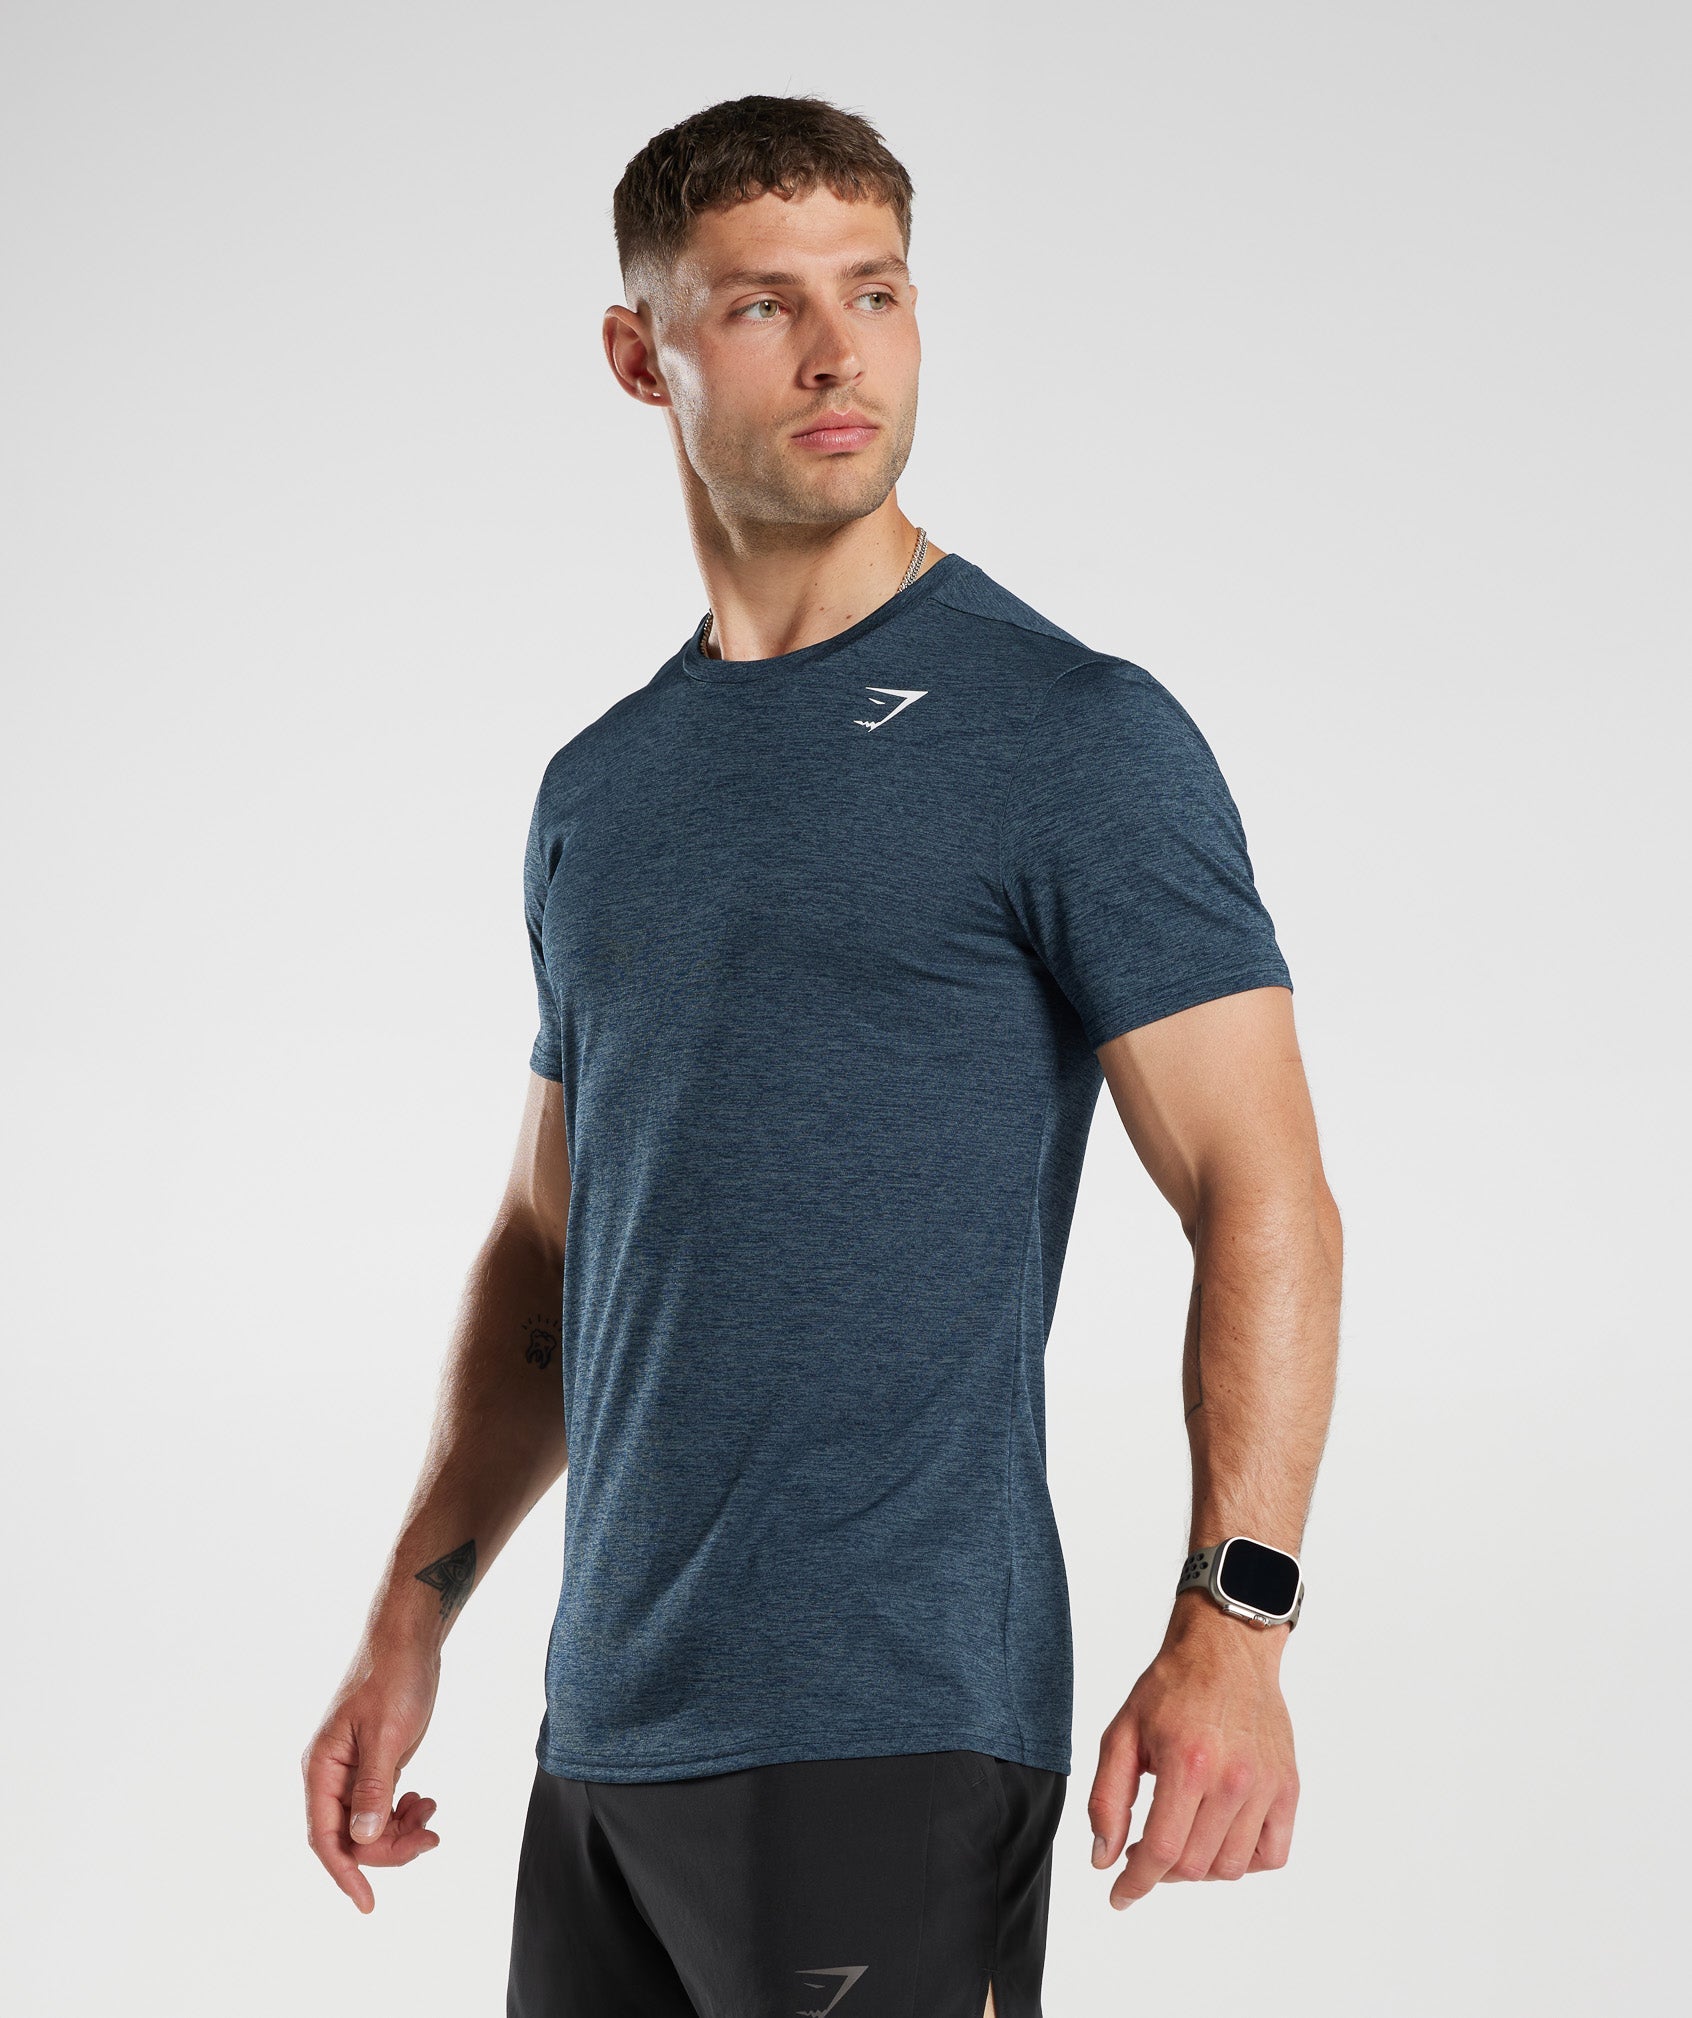 Arrival Marl T-Shirt in Navy/Smokey Teal Marl - view 3